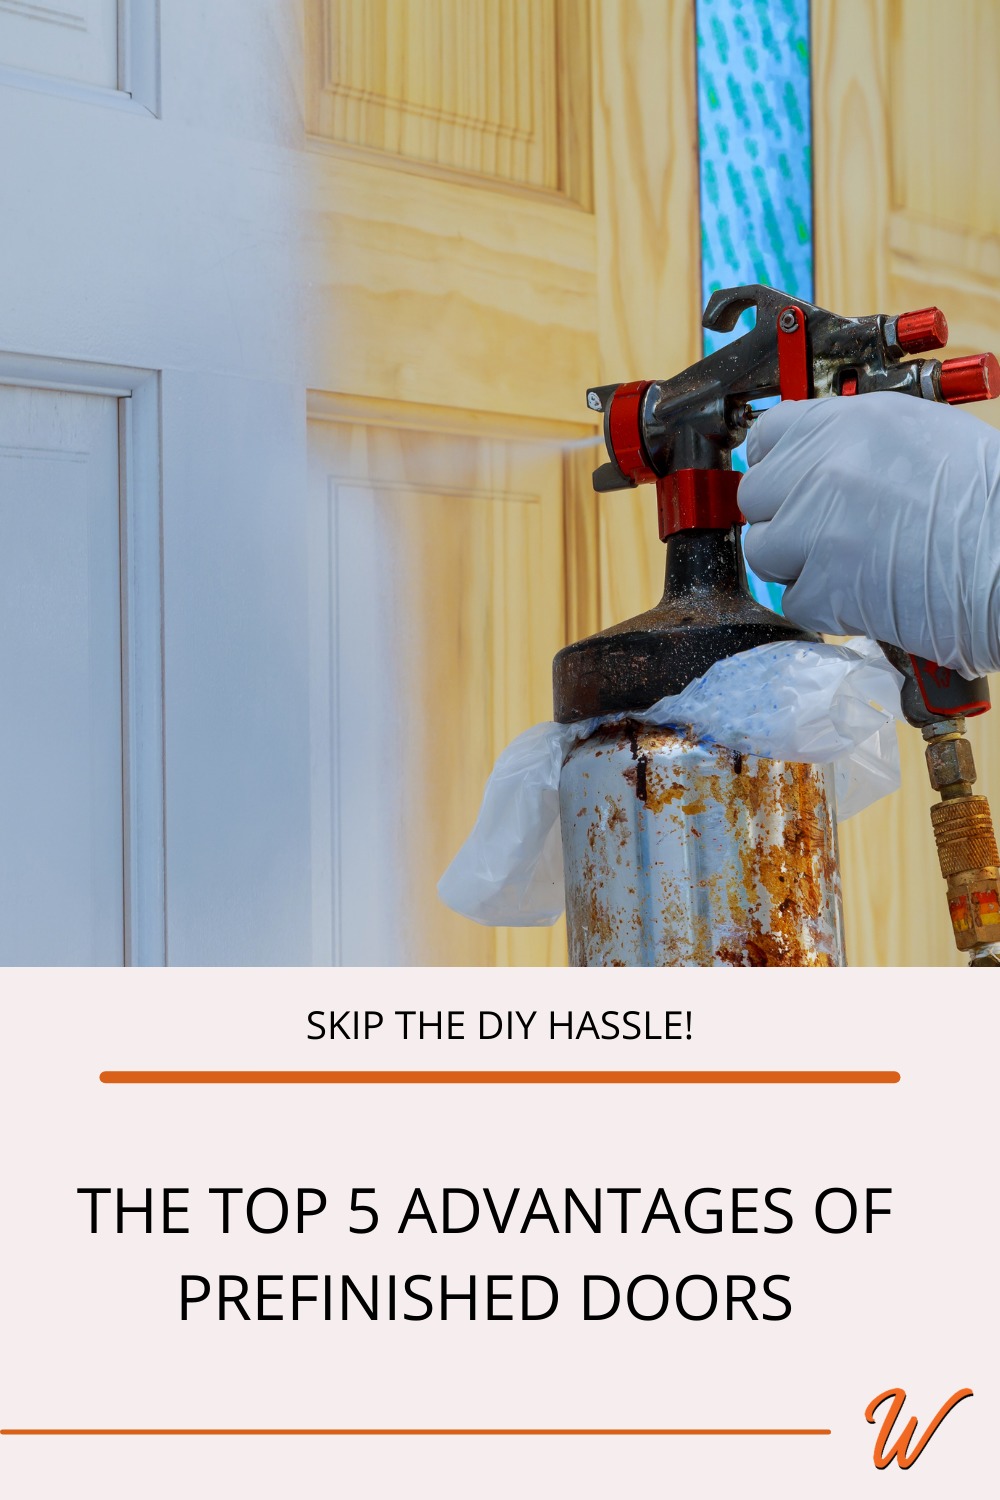 Technician applying paint to a door panel captioned with "Skip the DIY hassle: The top 5 advantages of prefinished doors"